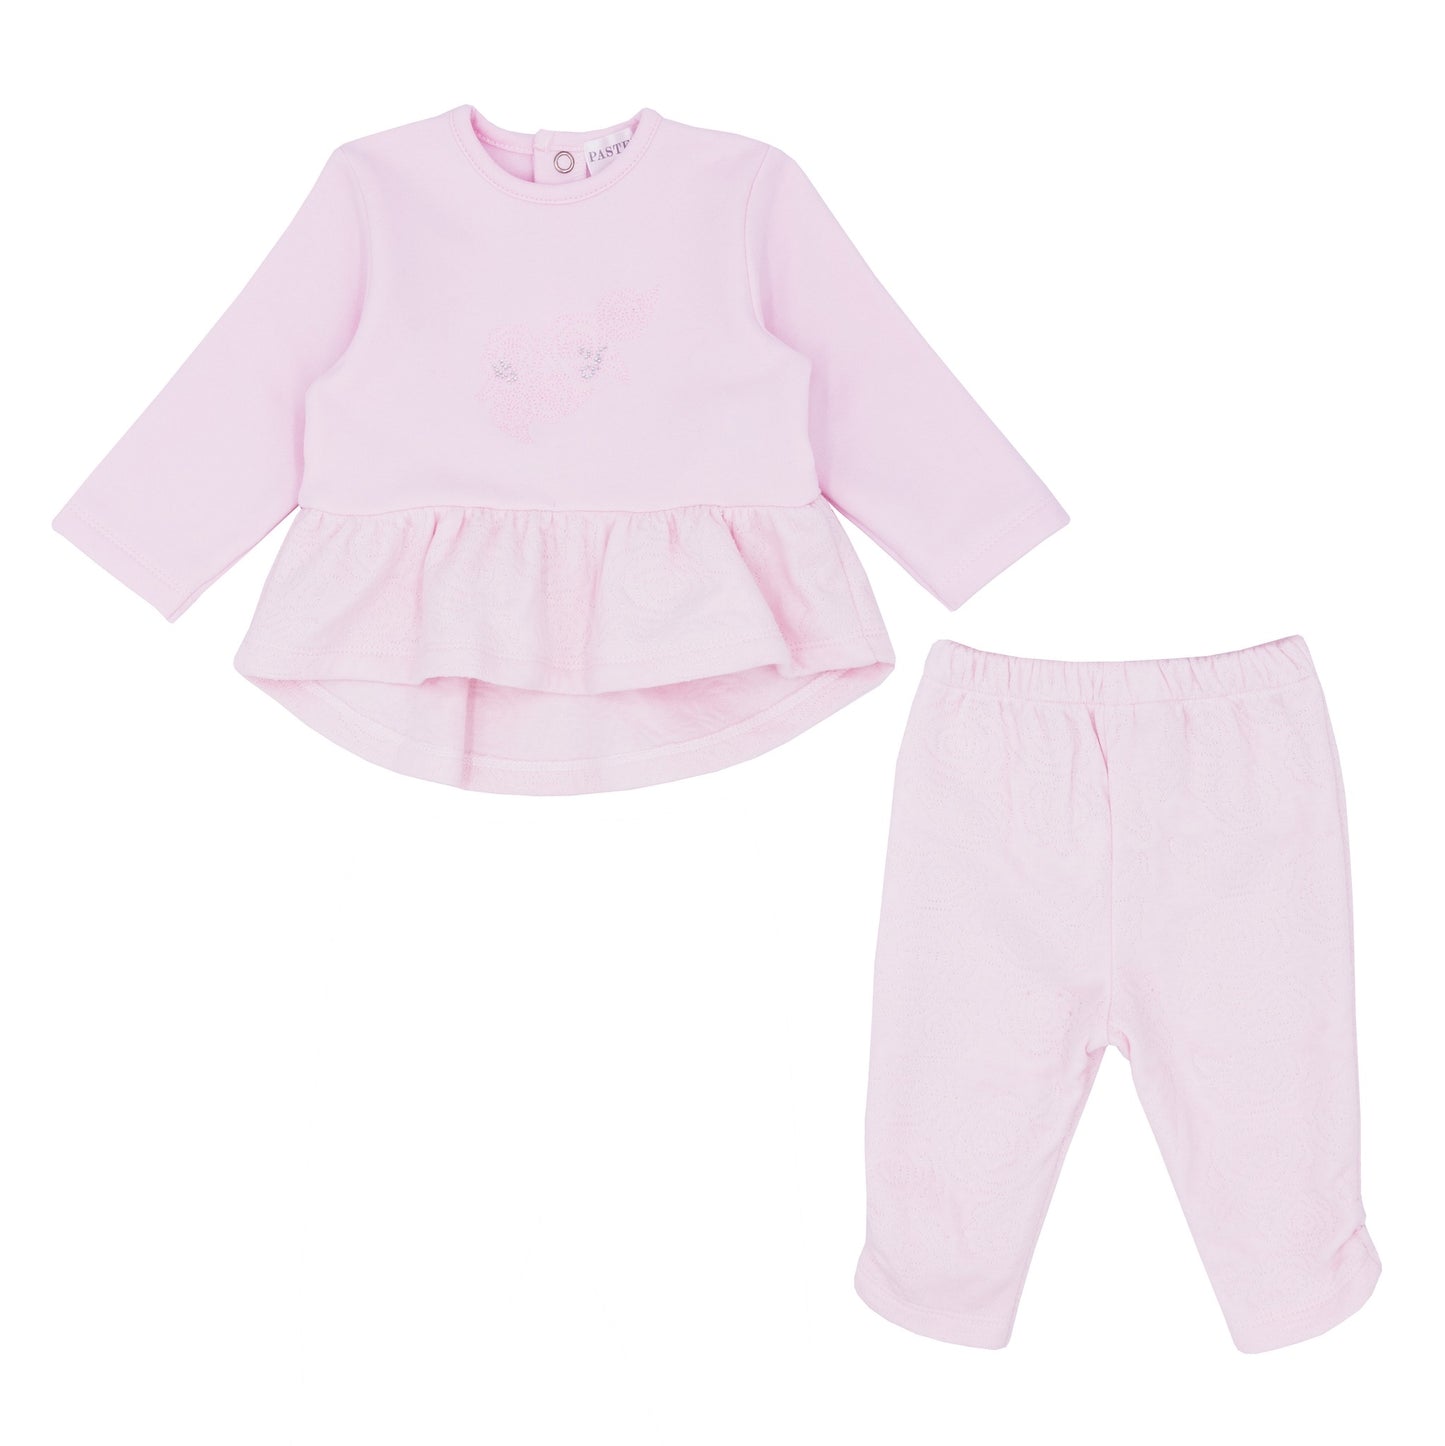 Pastels & Co Girls 2 Piece Trouser Set Alice AW